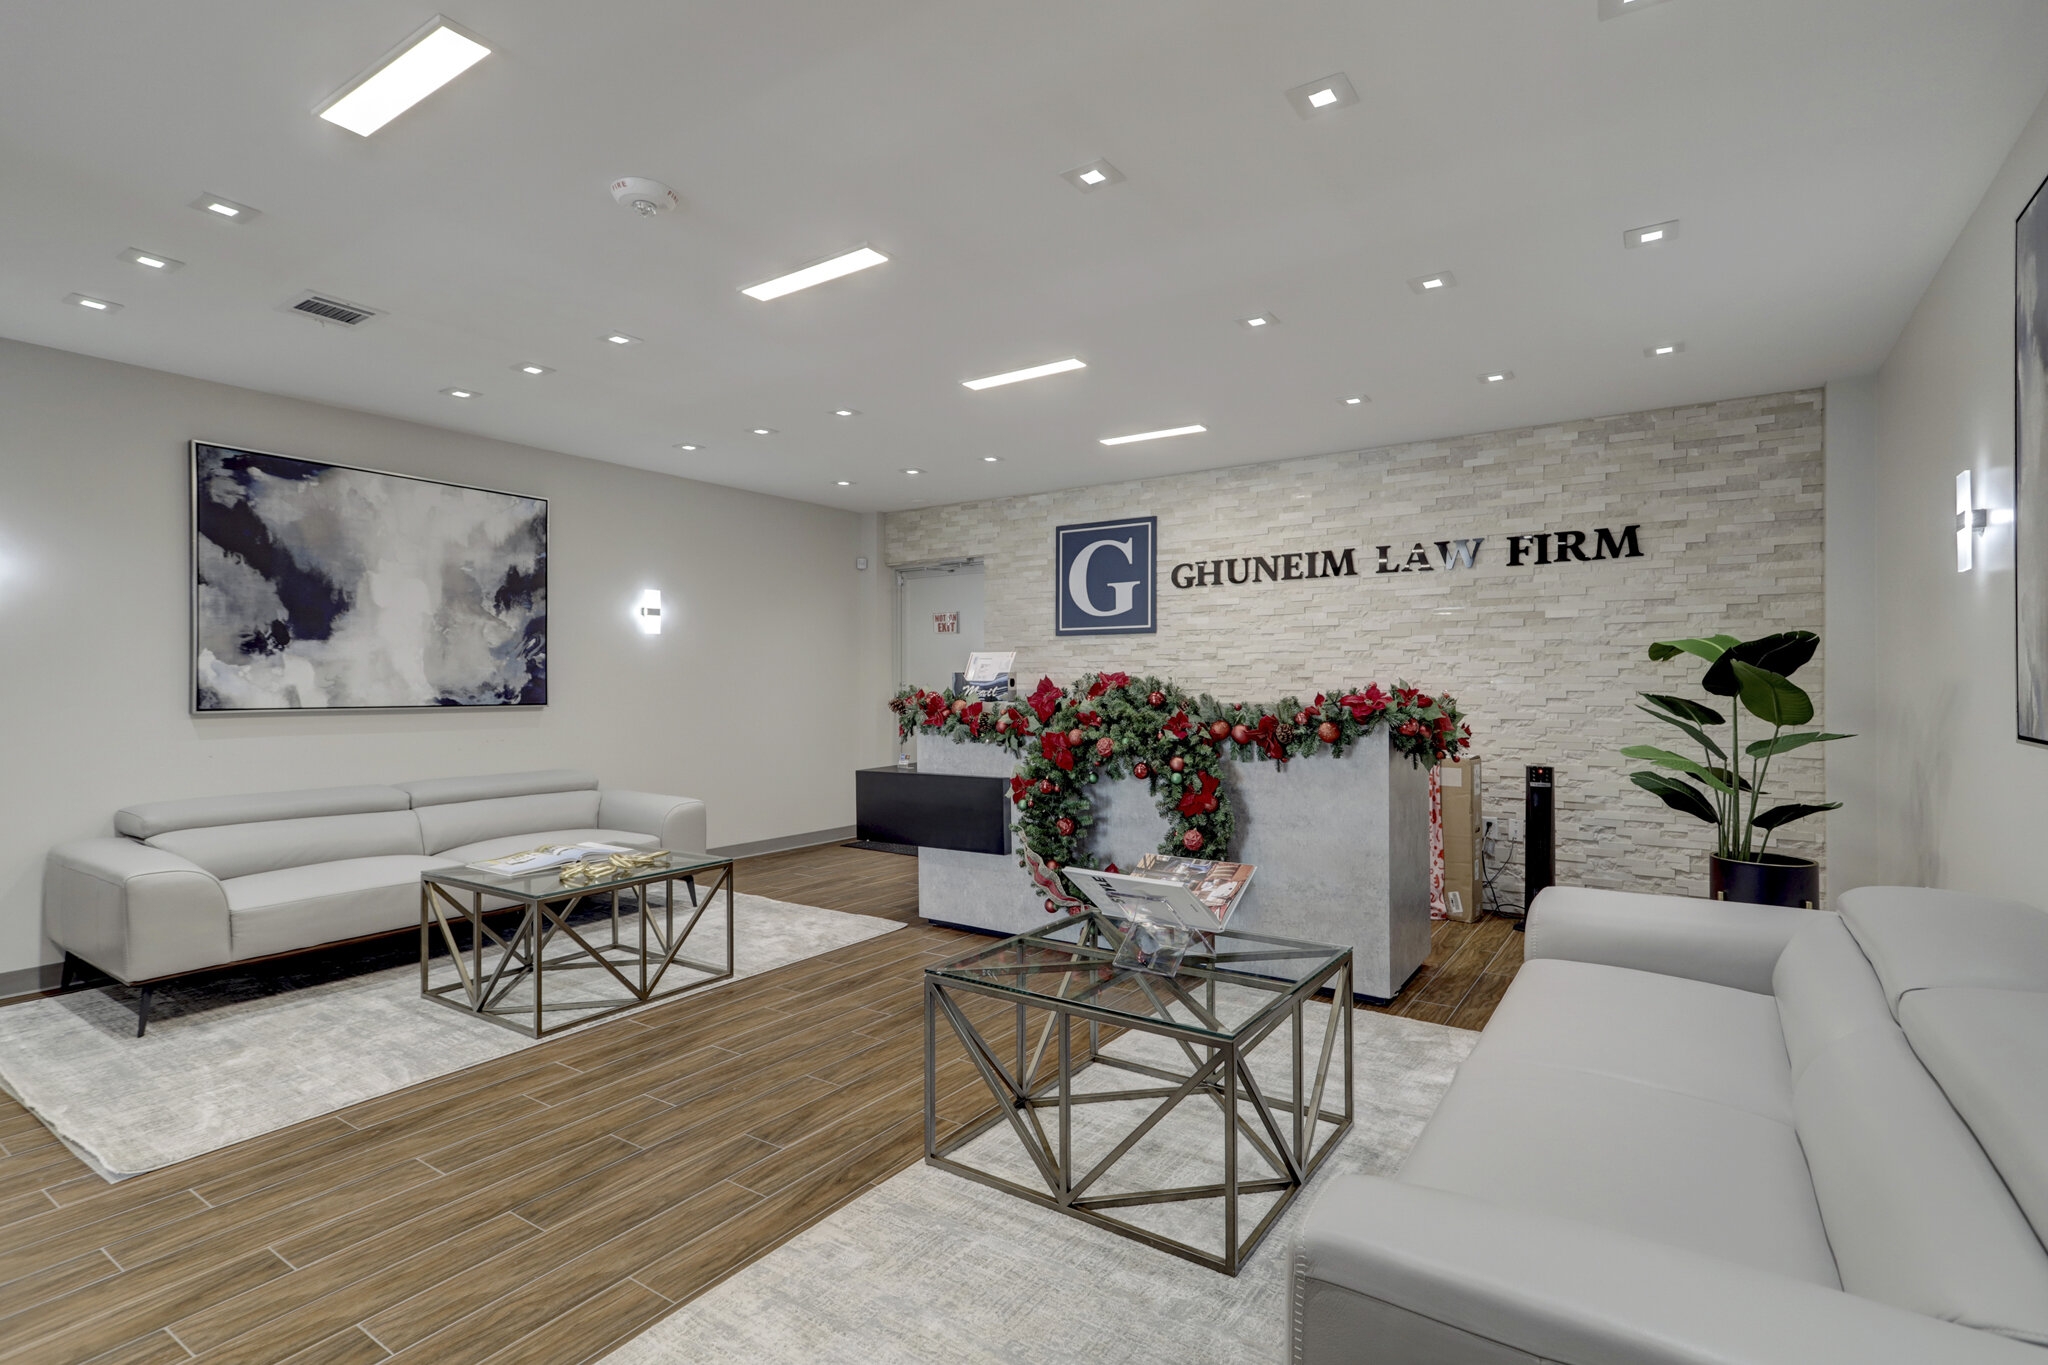 Ghunaim Law Firm Remodeling By Smart Remodeling LLC (Office Remodeling)